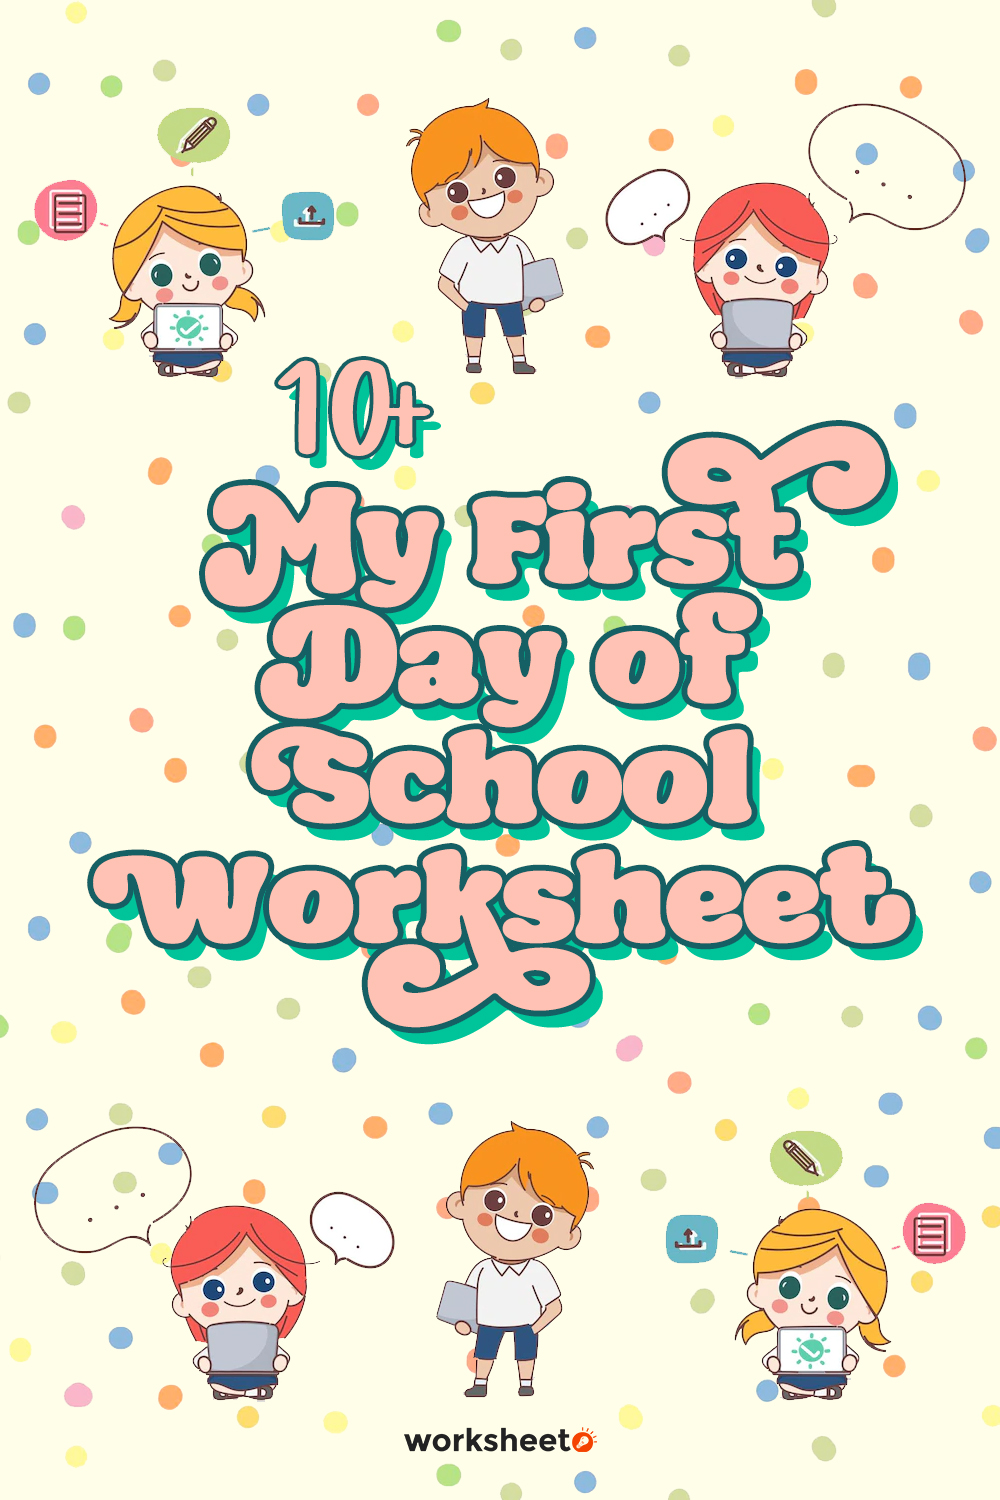 18 Images of My First Day Of School Worksheet